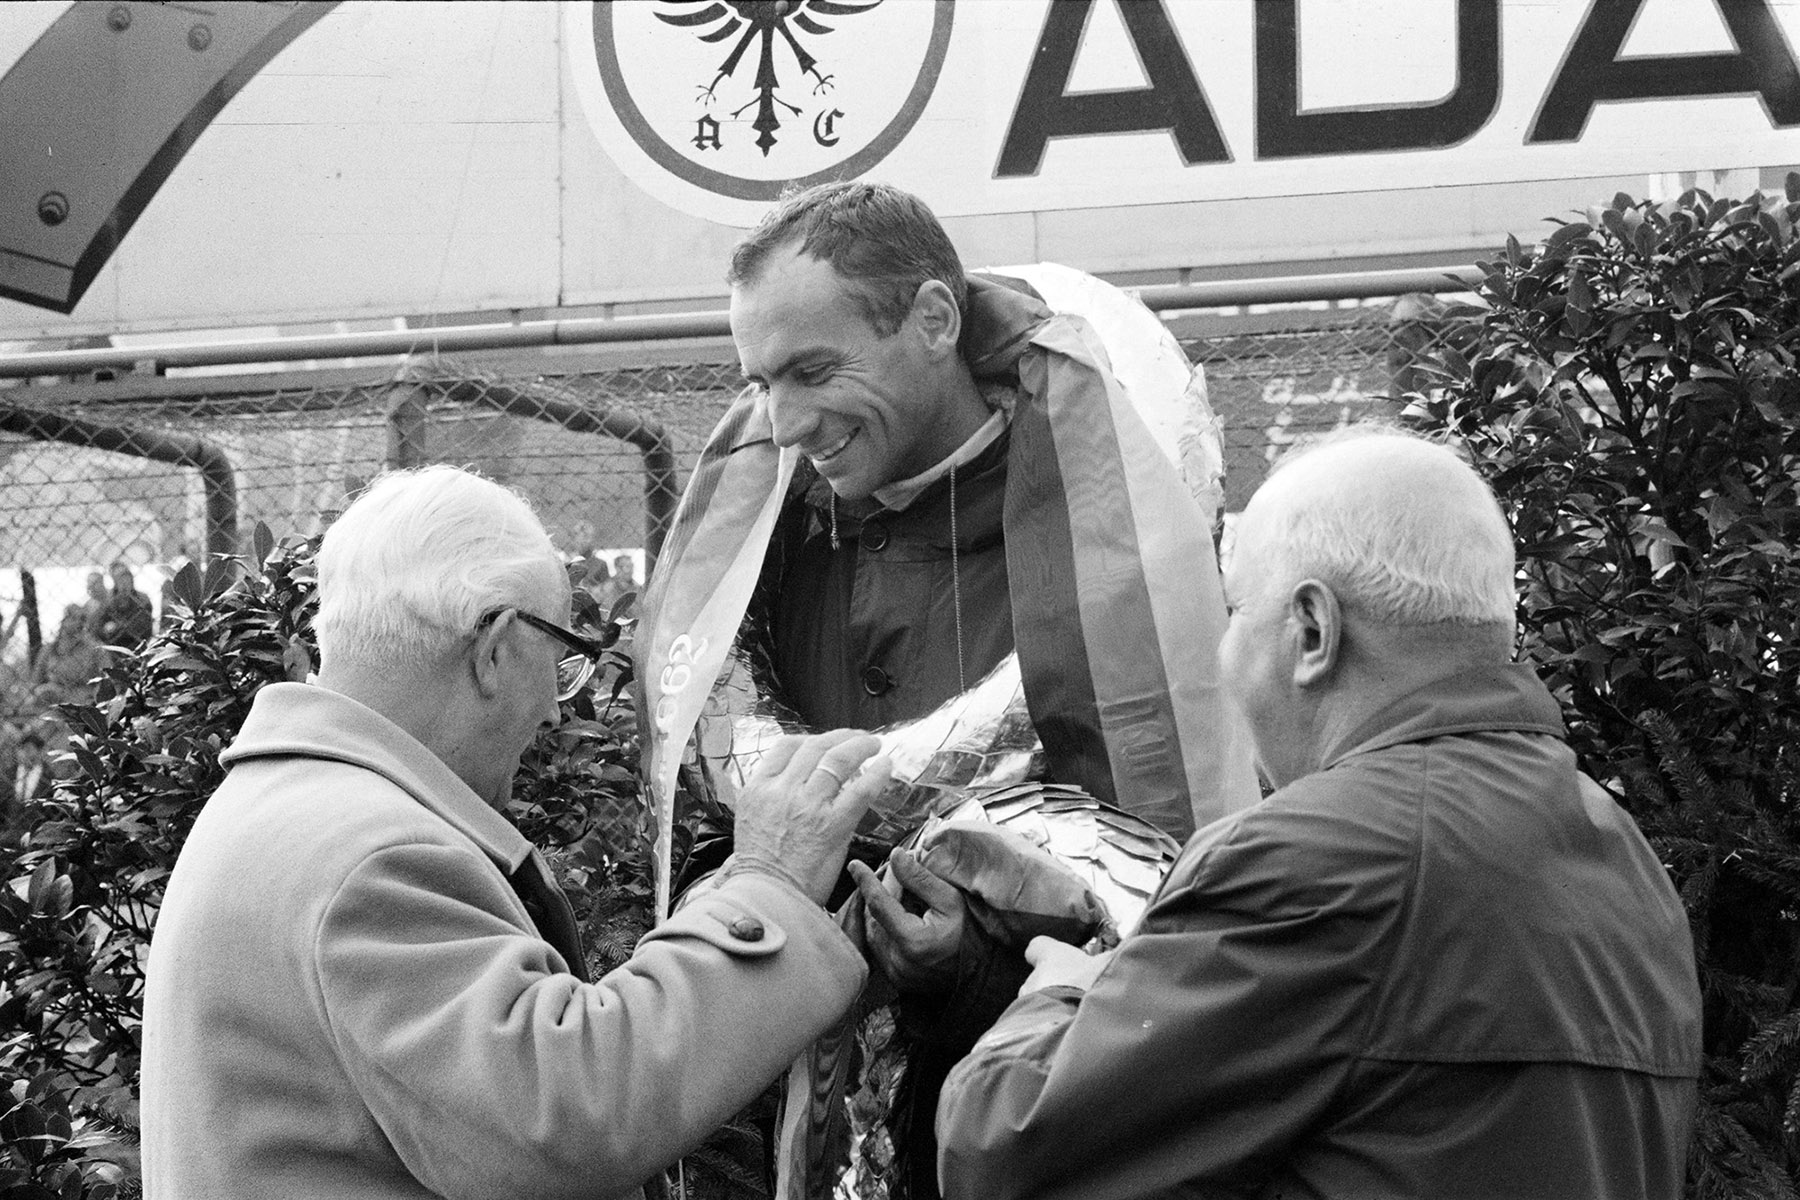 Willy Mairesse, 2nd position, on the podium following the Nürburgring 1000 kms at Nürburgring on 27 May 1962.